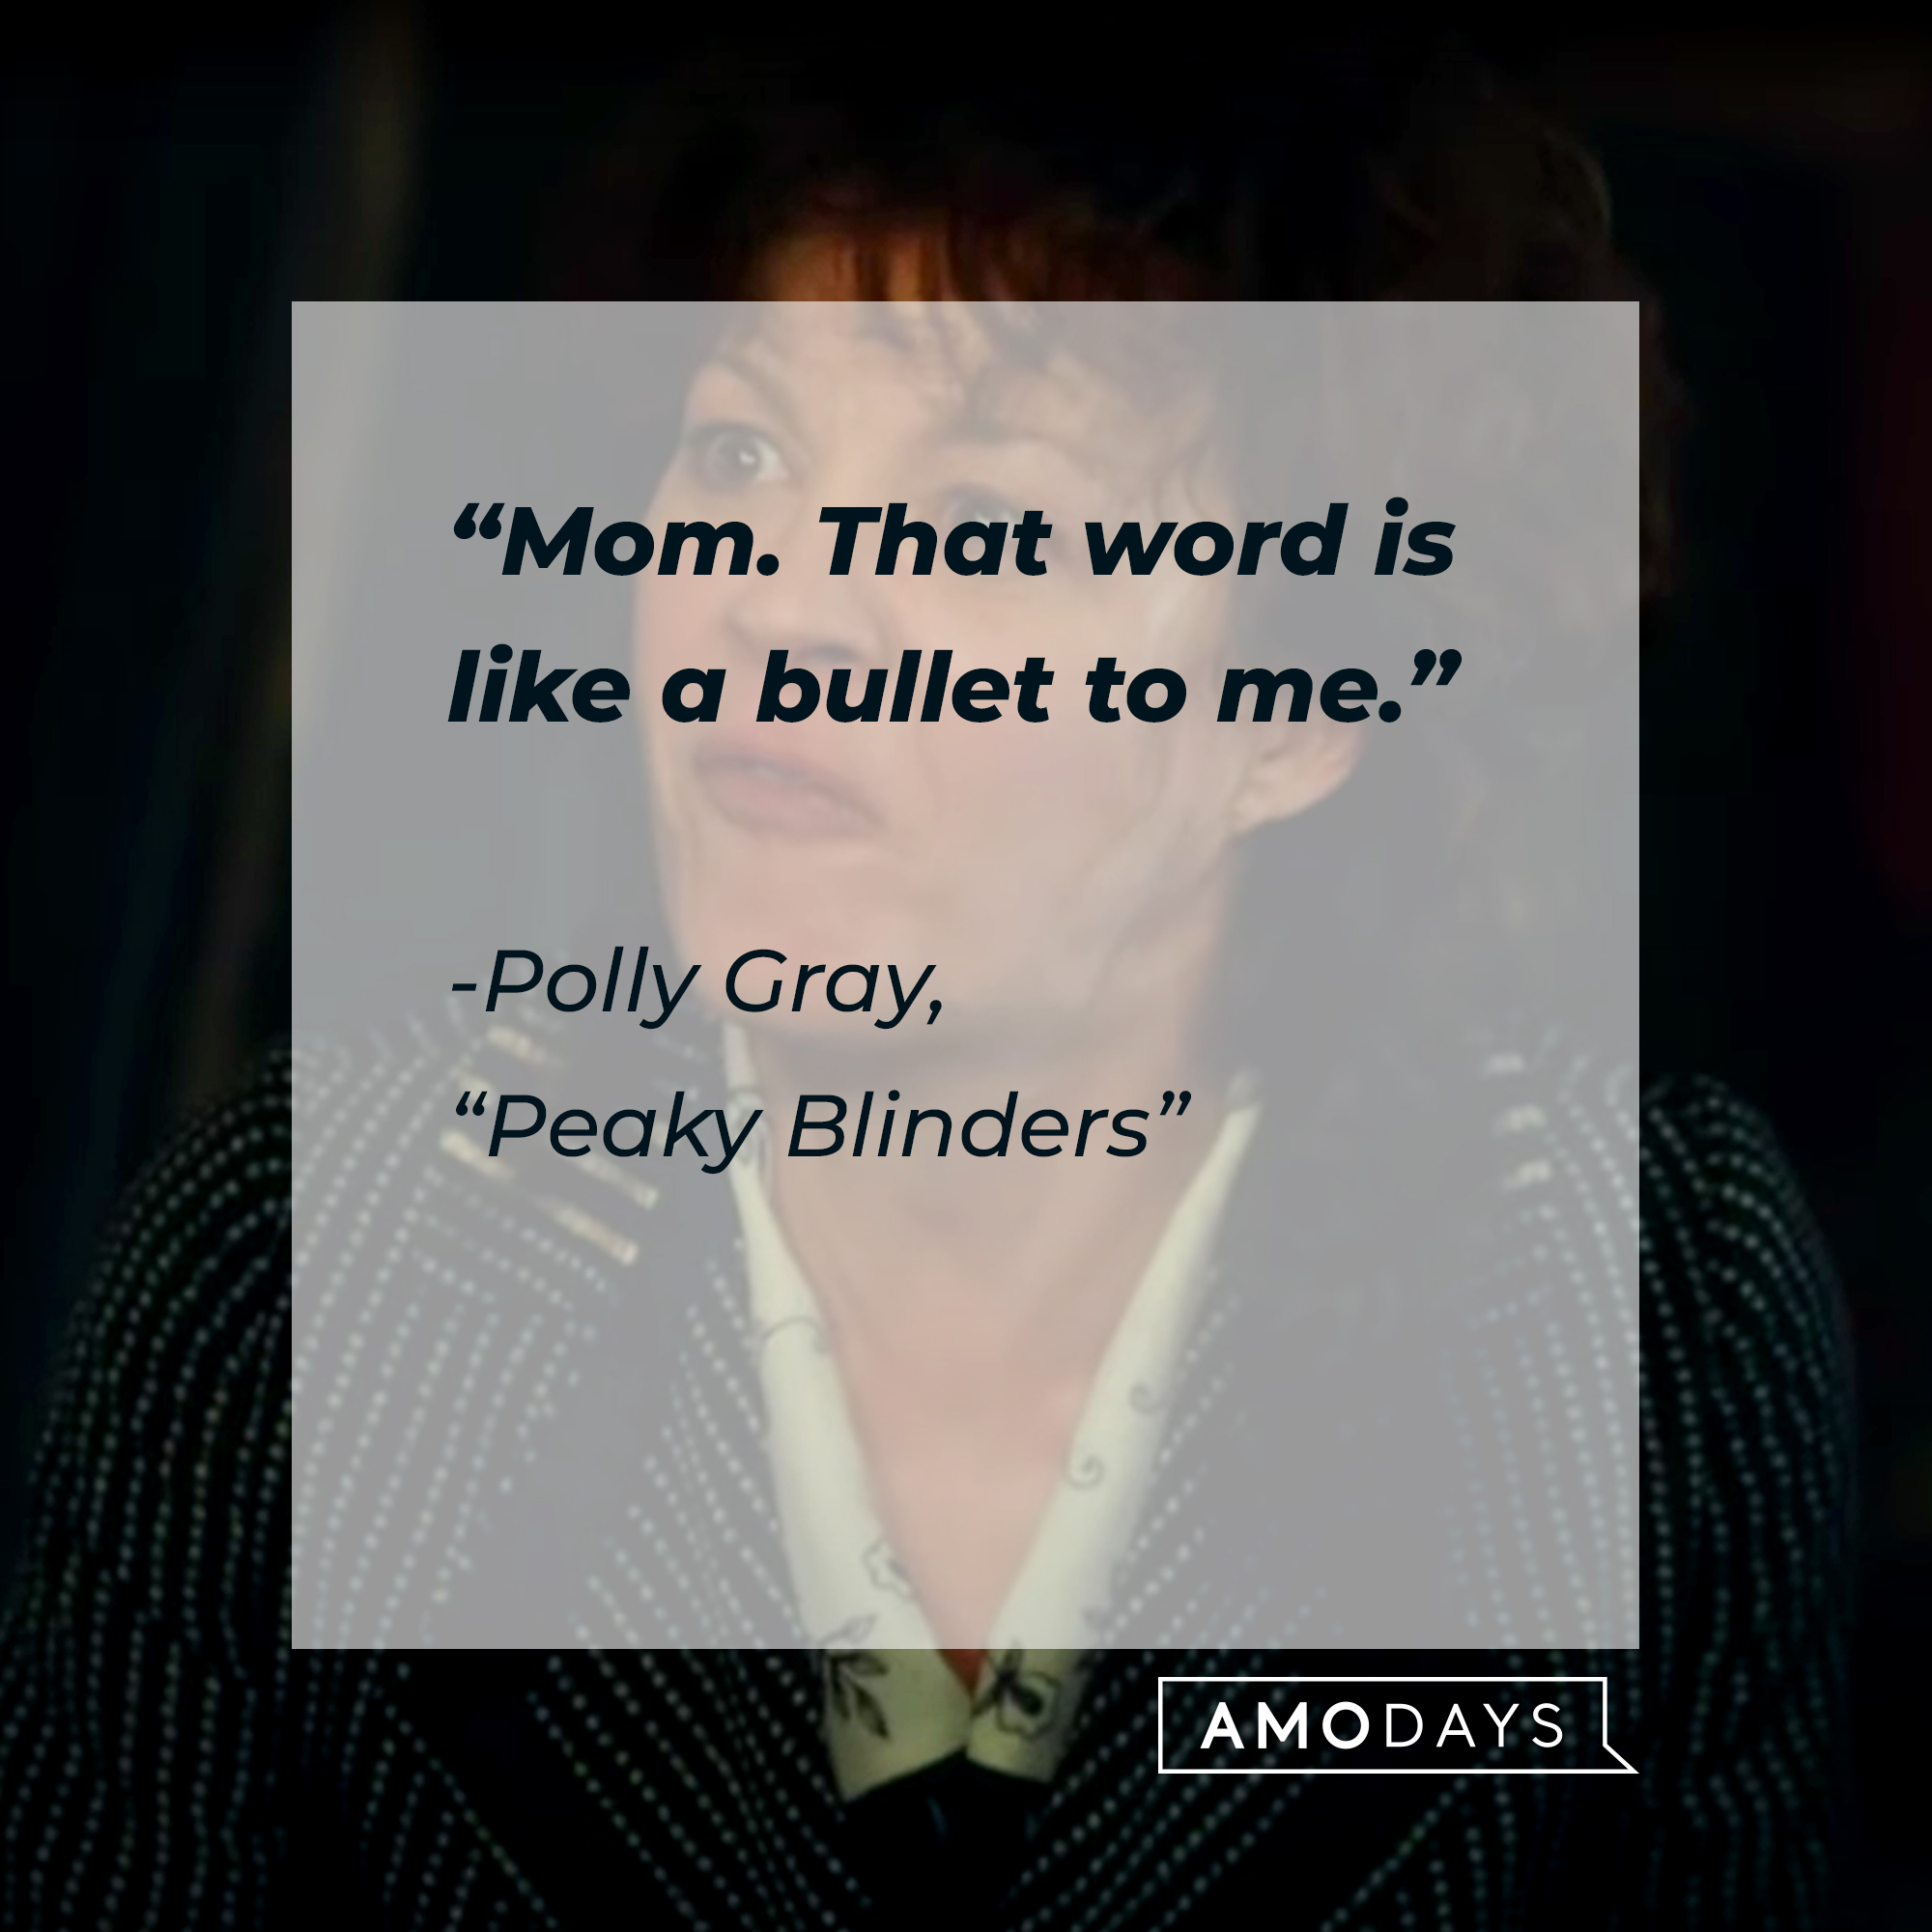 Polly Gray’s quote from “Peaky Blinders”: “Mom. That word is like a bullet to me.” | Source: Youtube.com/BBC